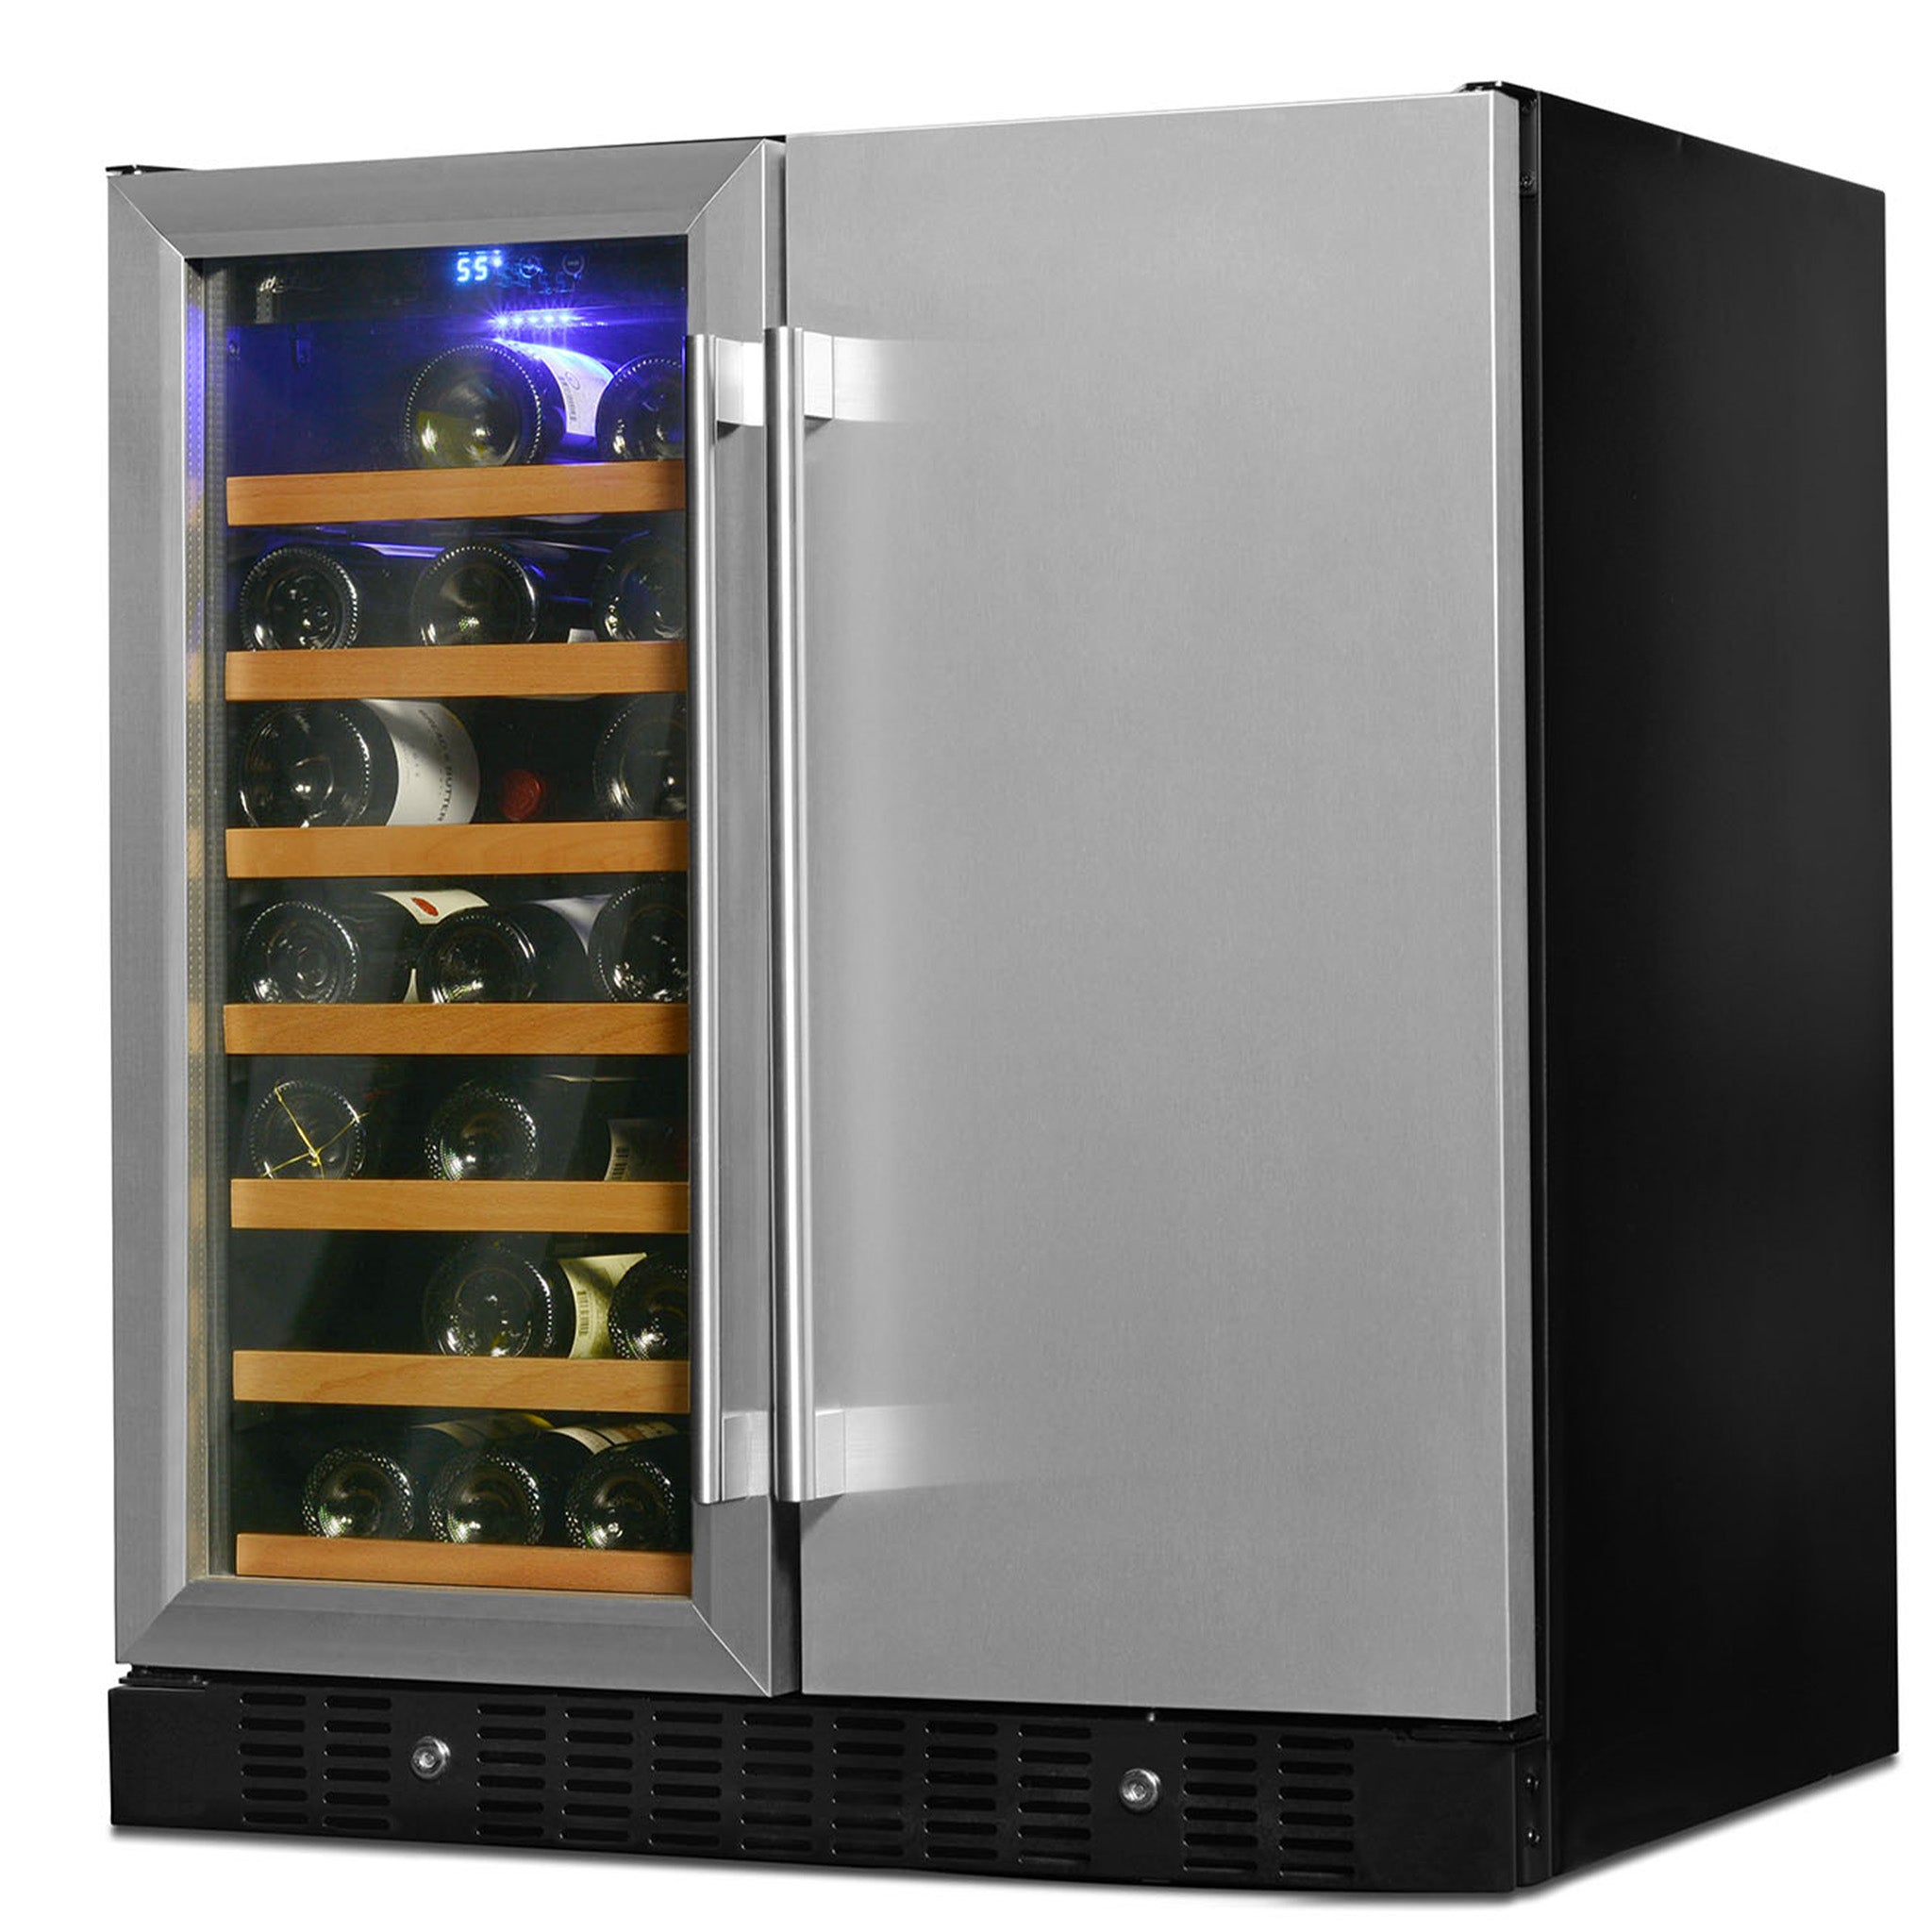 Smith & Hanks - 32" Dual-Zone Built-In/Freestanding Stainless Steel Wine & Beverage Center (RE100050)